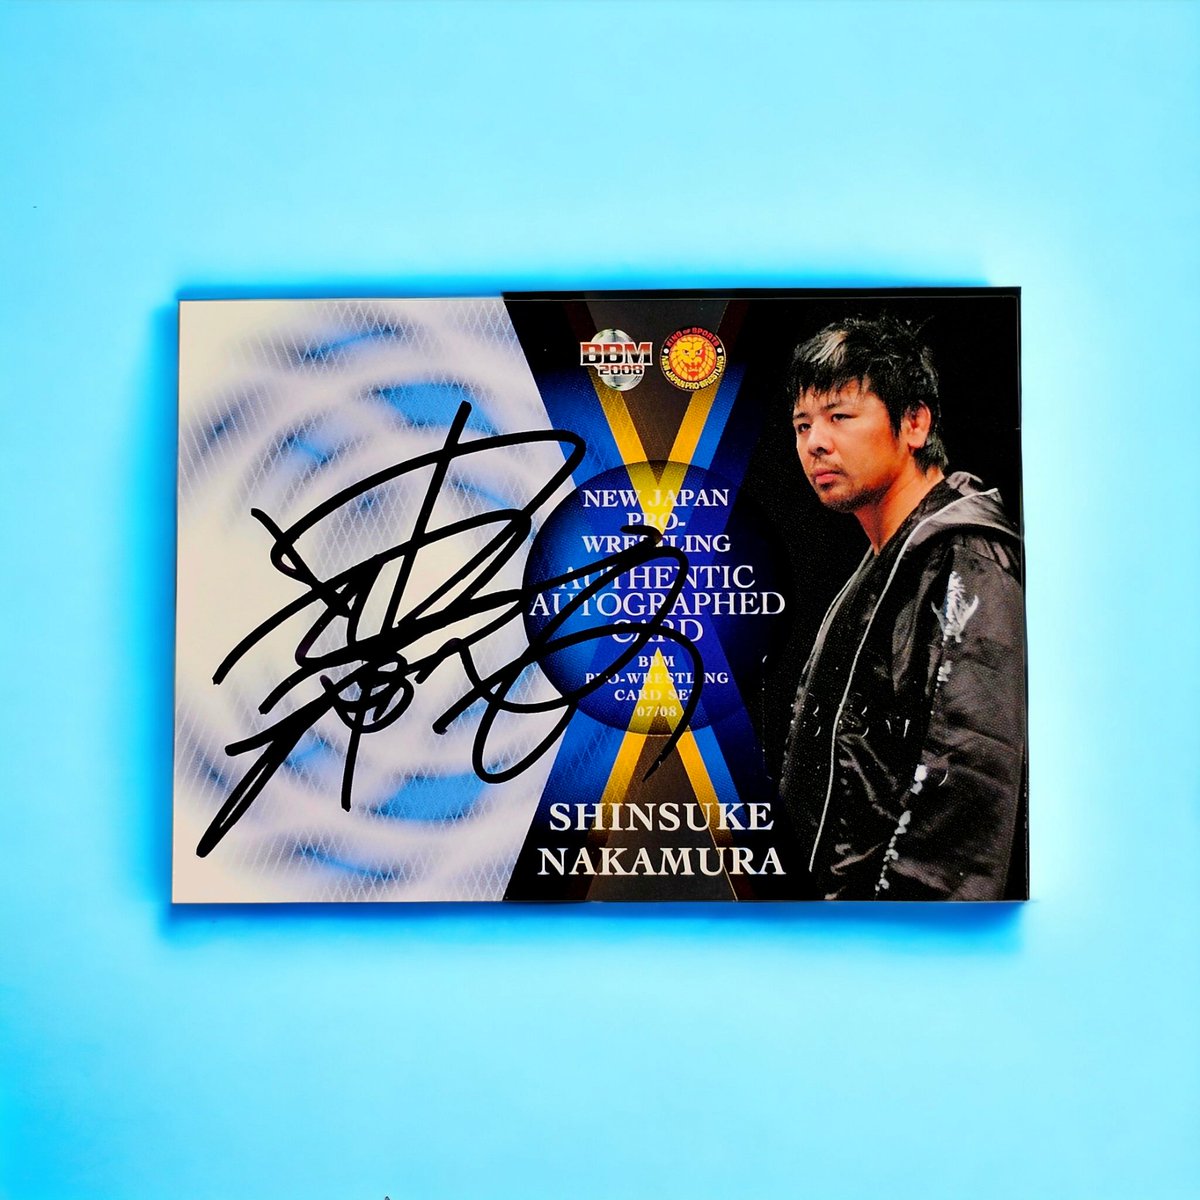 And now for a FULL signature to wrap up my #wrestlingcardwednesday posts for today